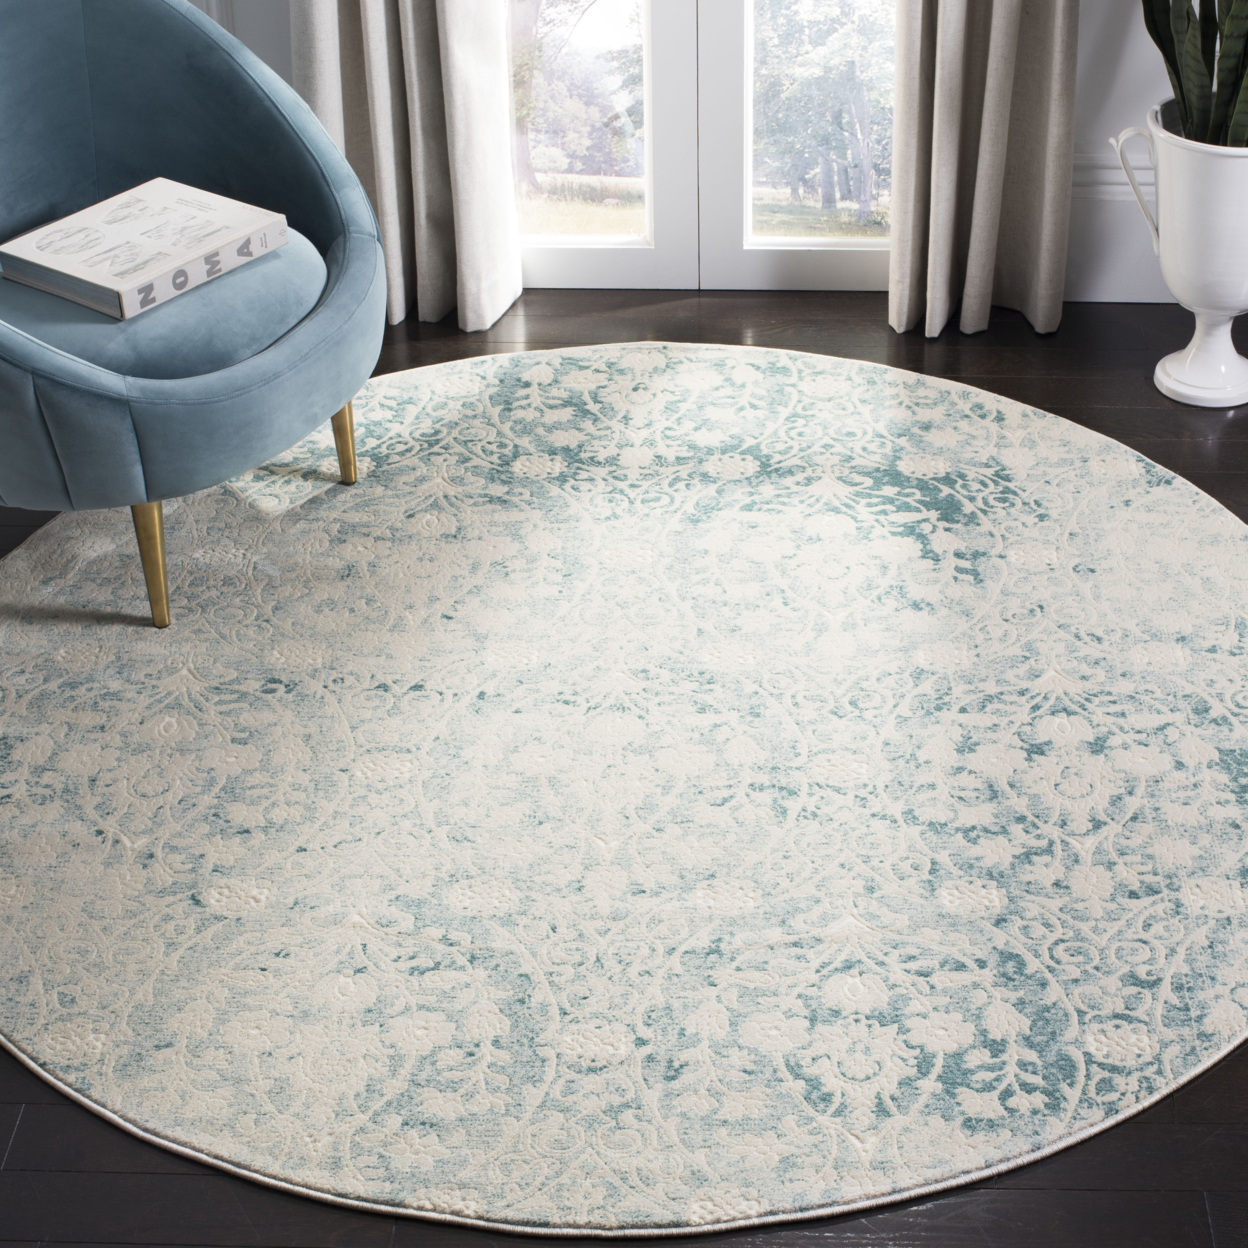 SAFAVIEH Passion Collection PAS403B Turquoise / Ivory Rug - 6' 7 Round